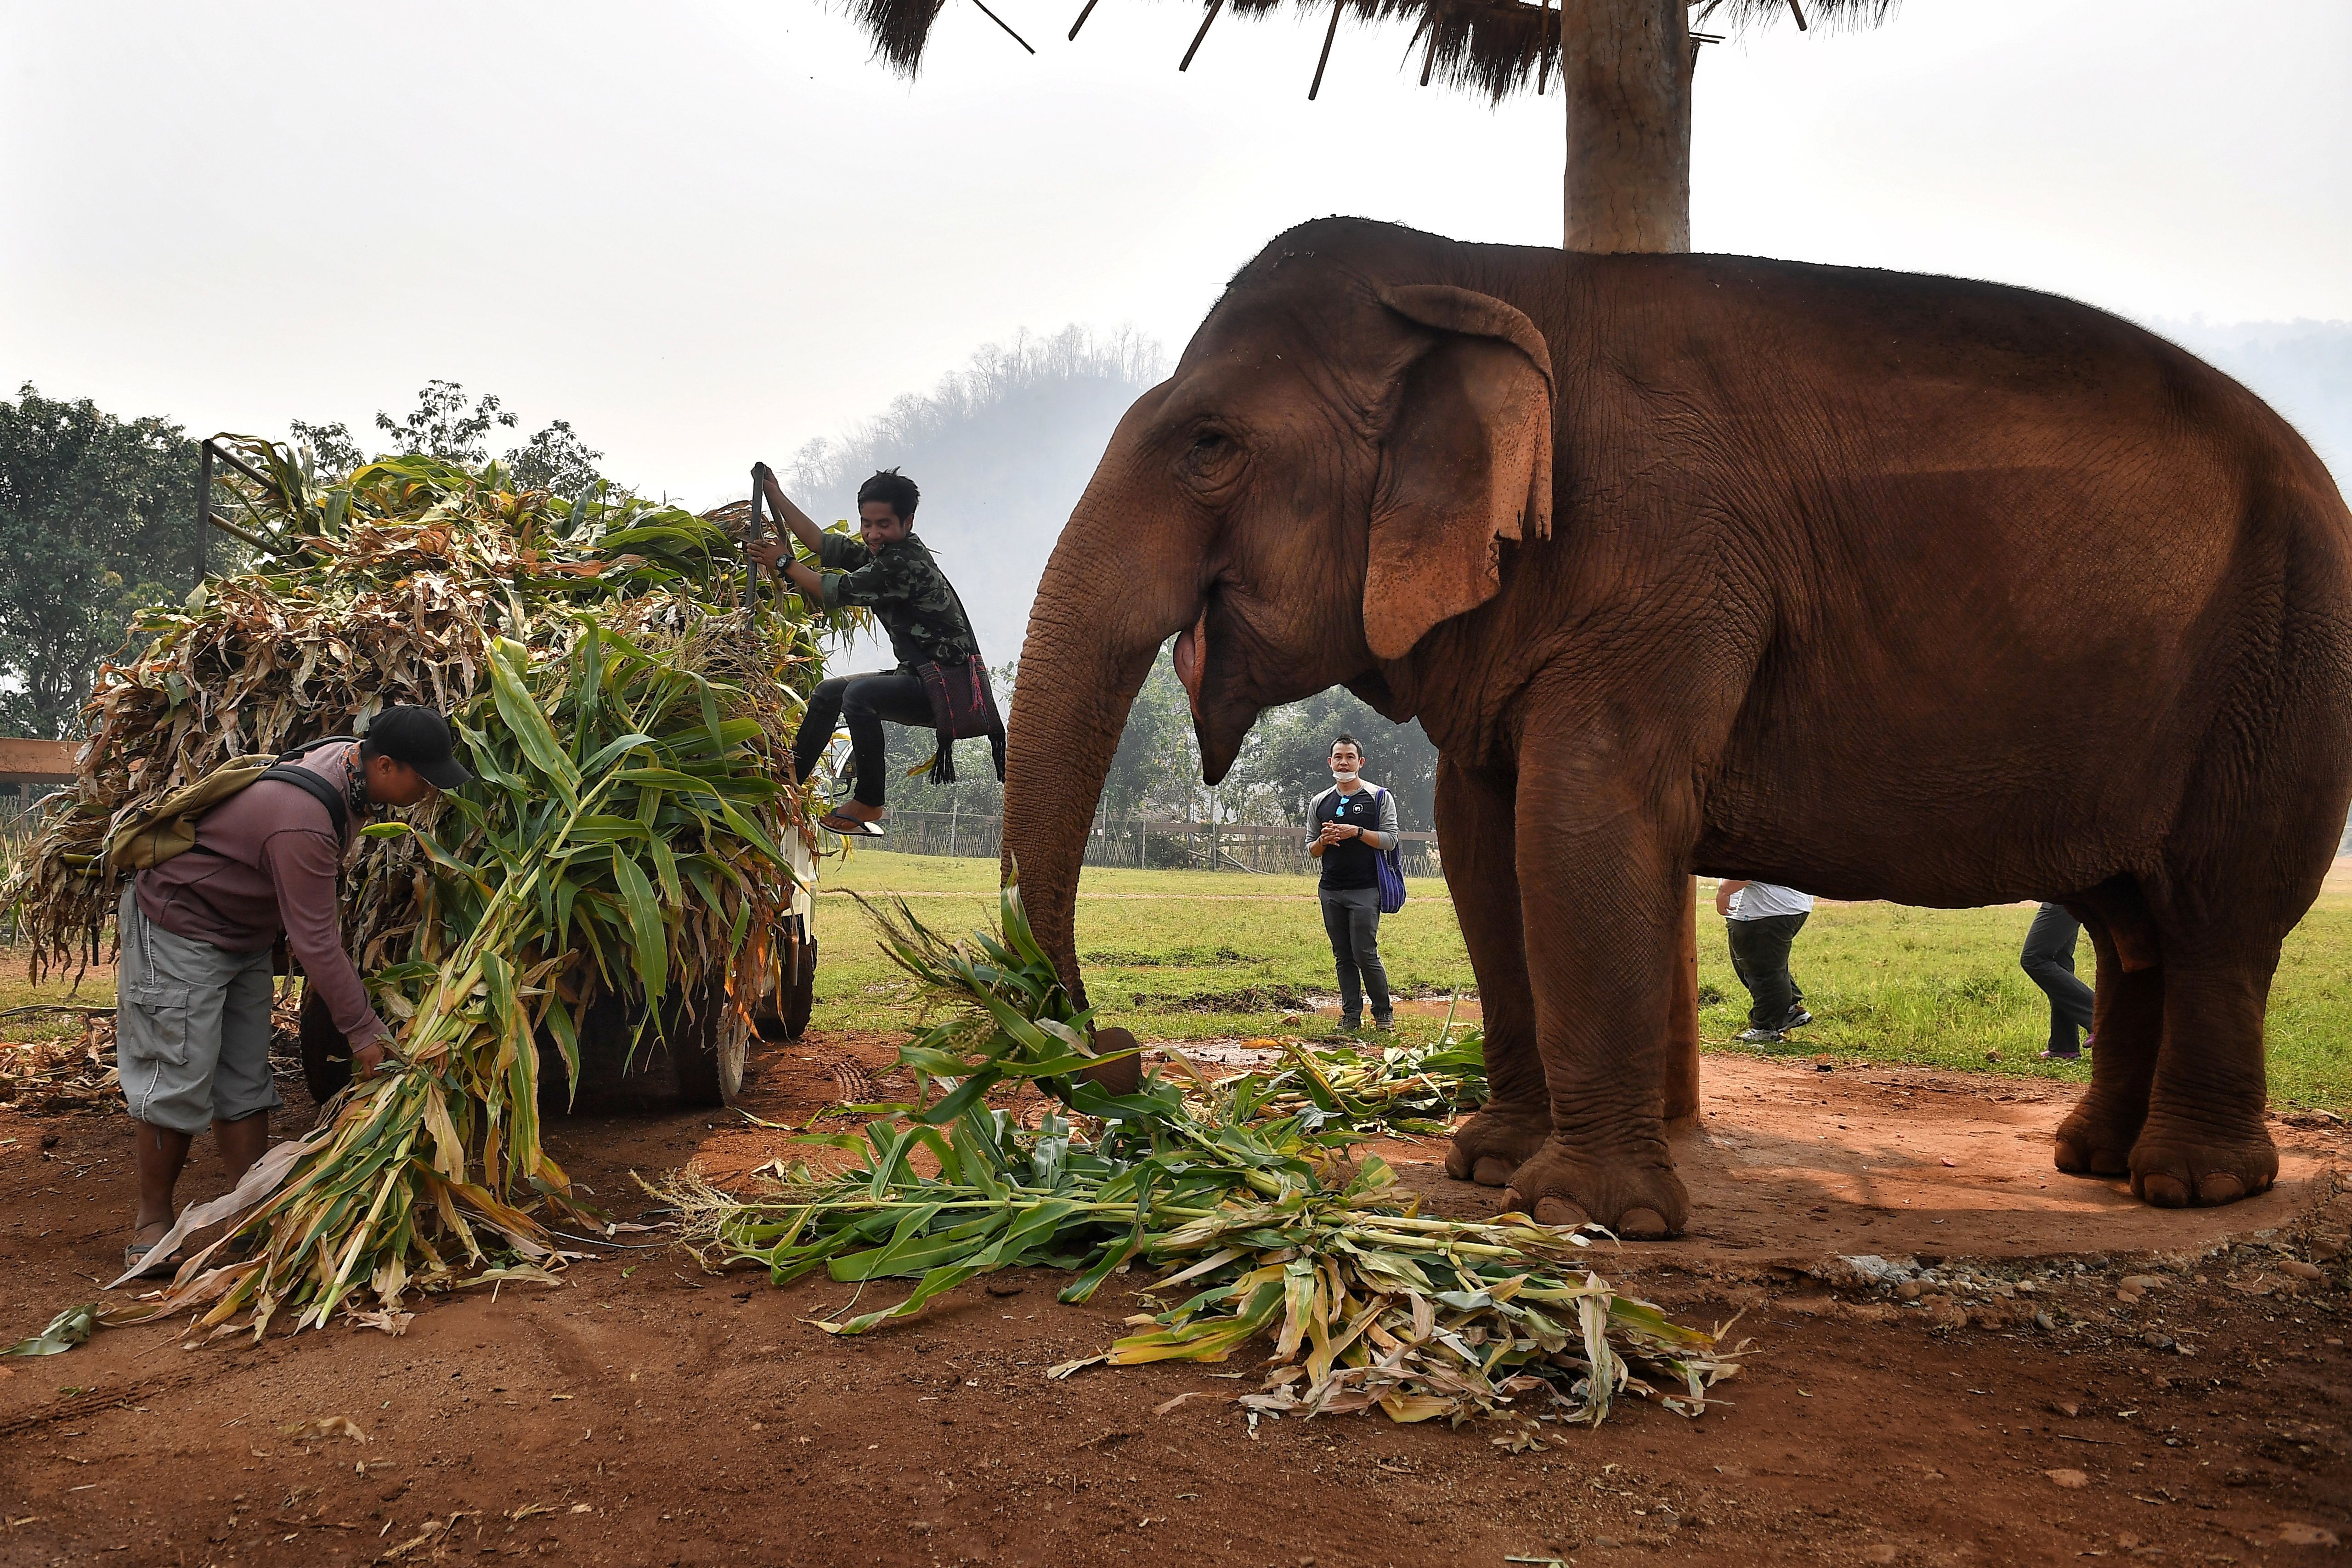 Mahouts feed elephants rescued from the tourism and logging trade at the Elephant Nature Park in the northern Thai province of Chiang Mai